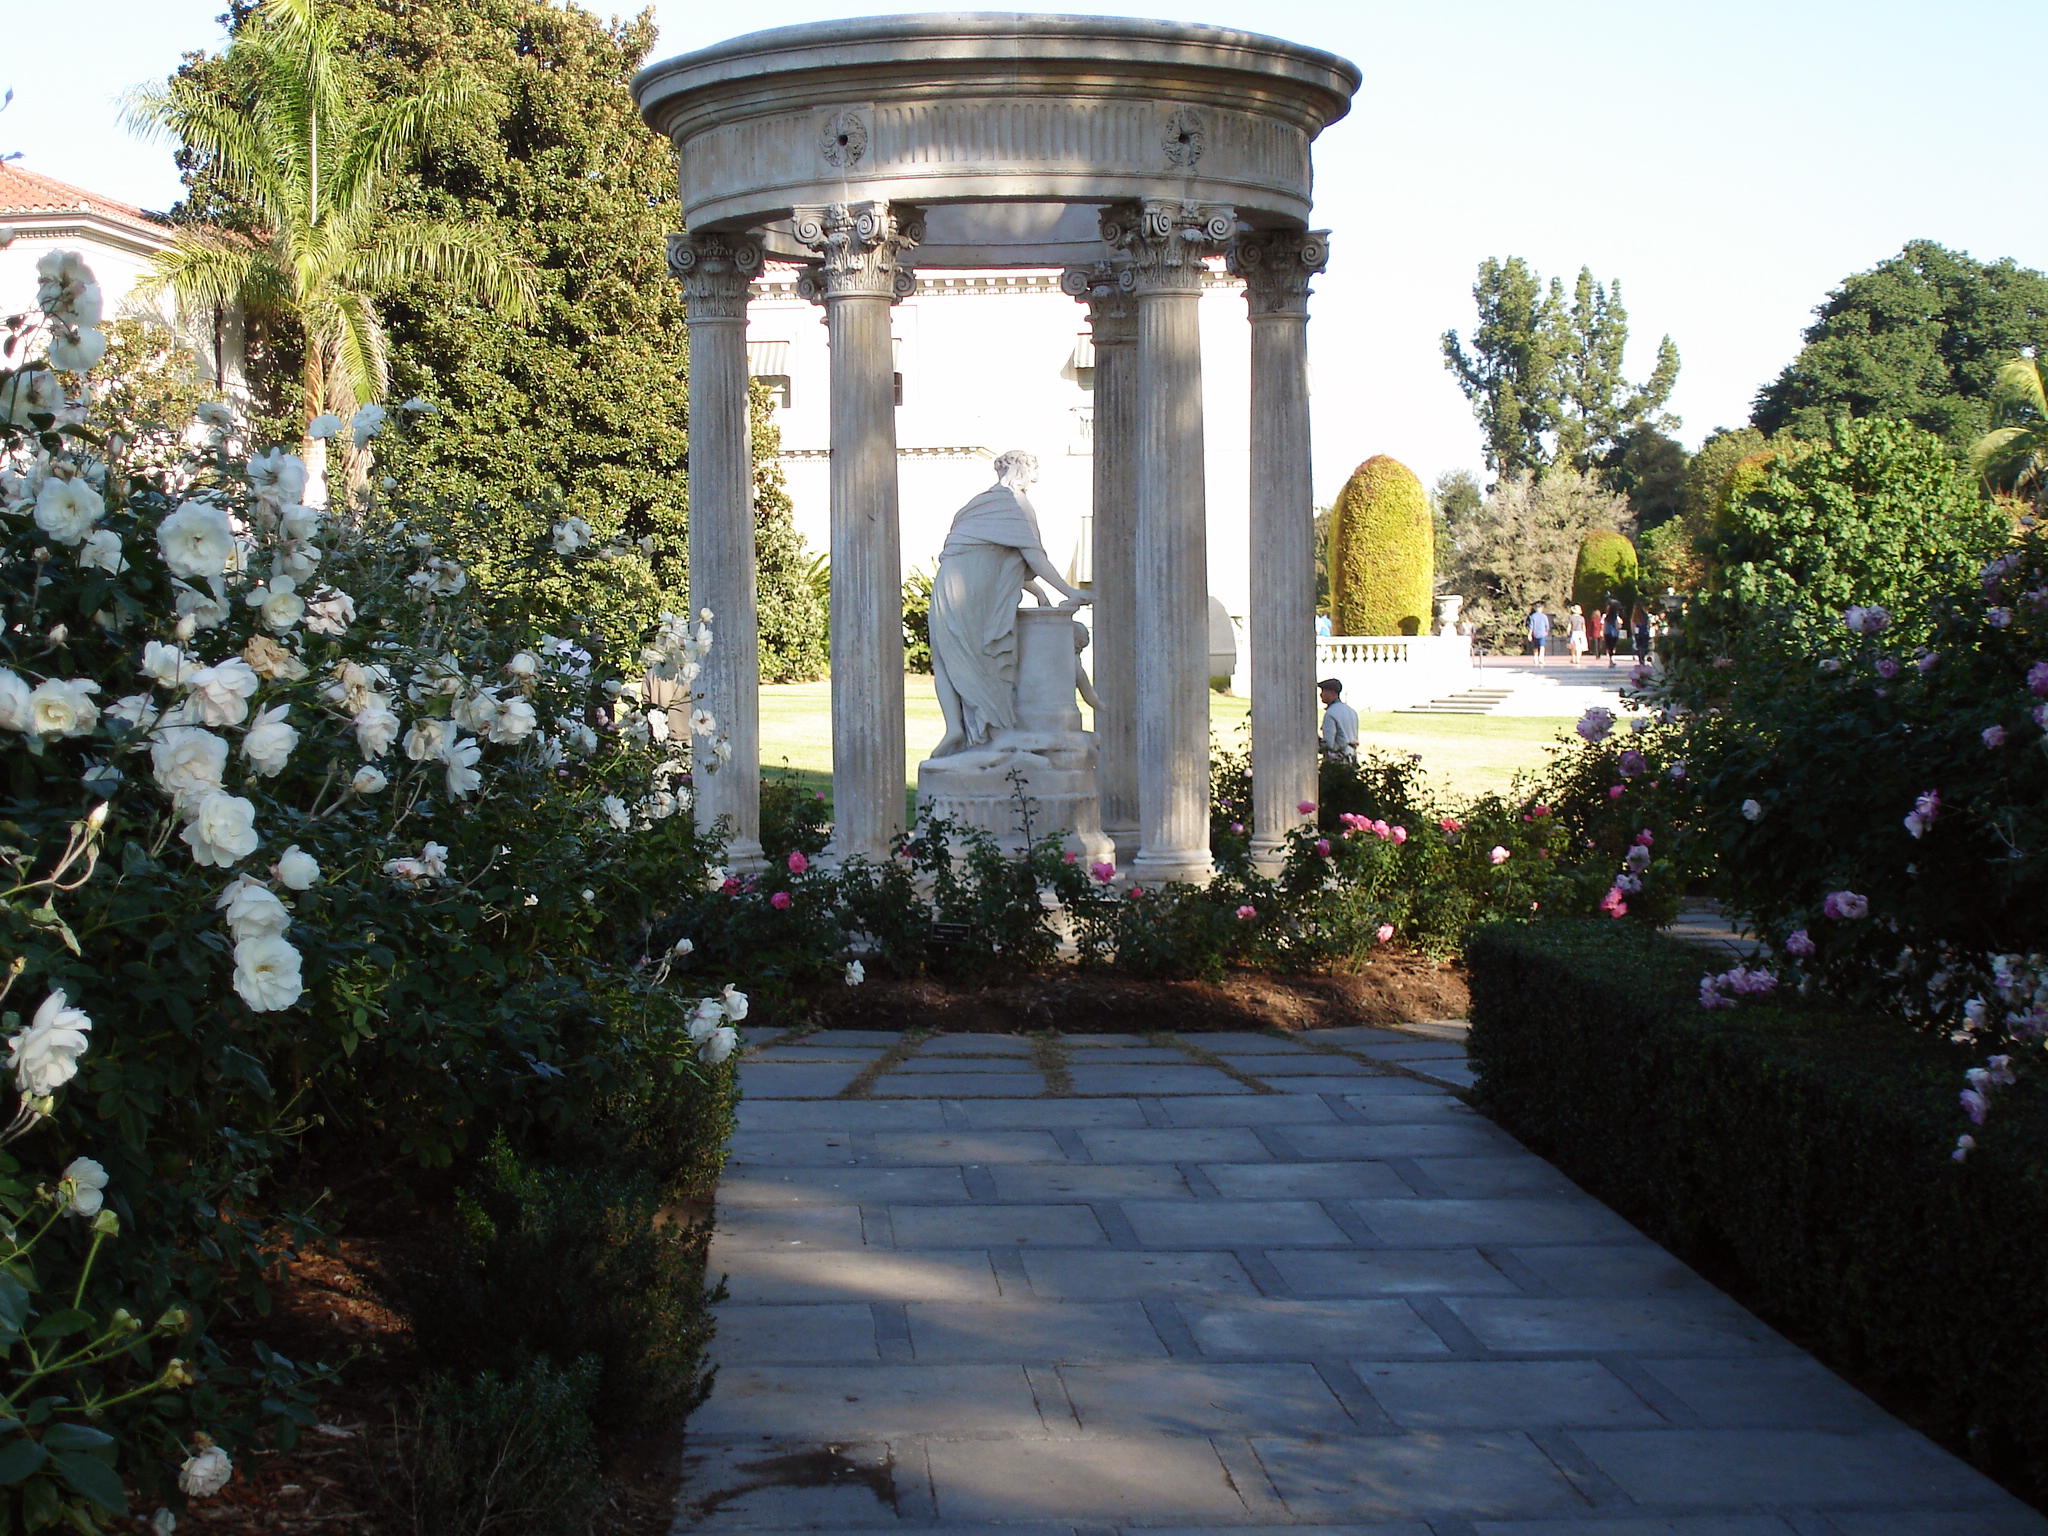 Take time to smell the roses at the Huntington